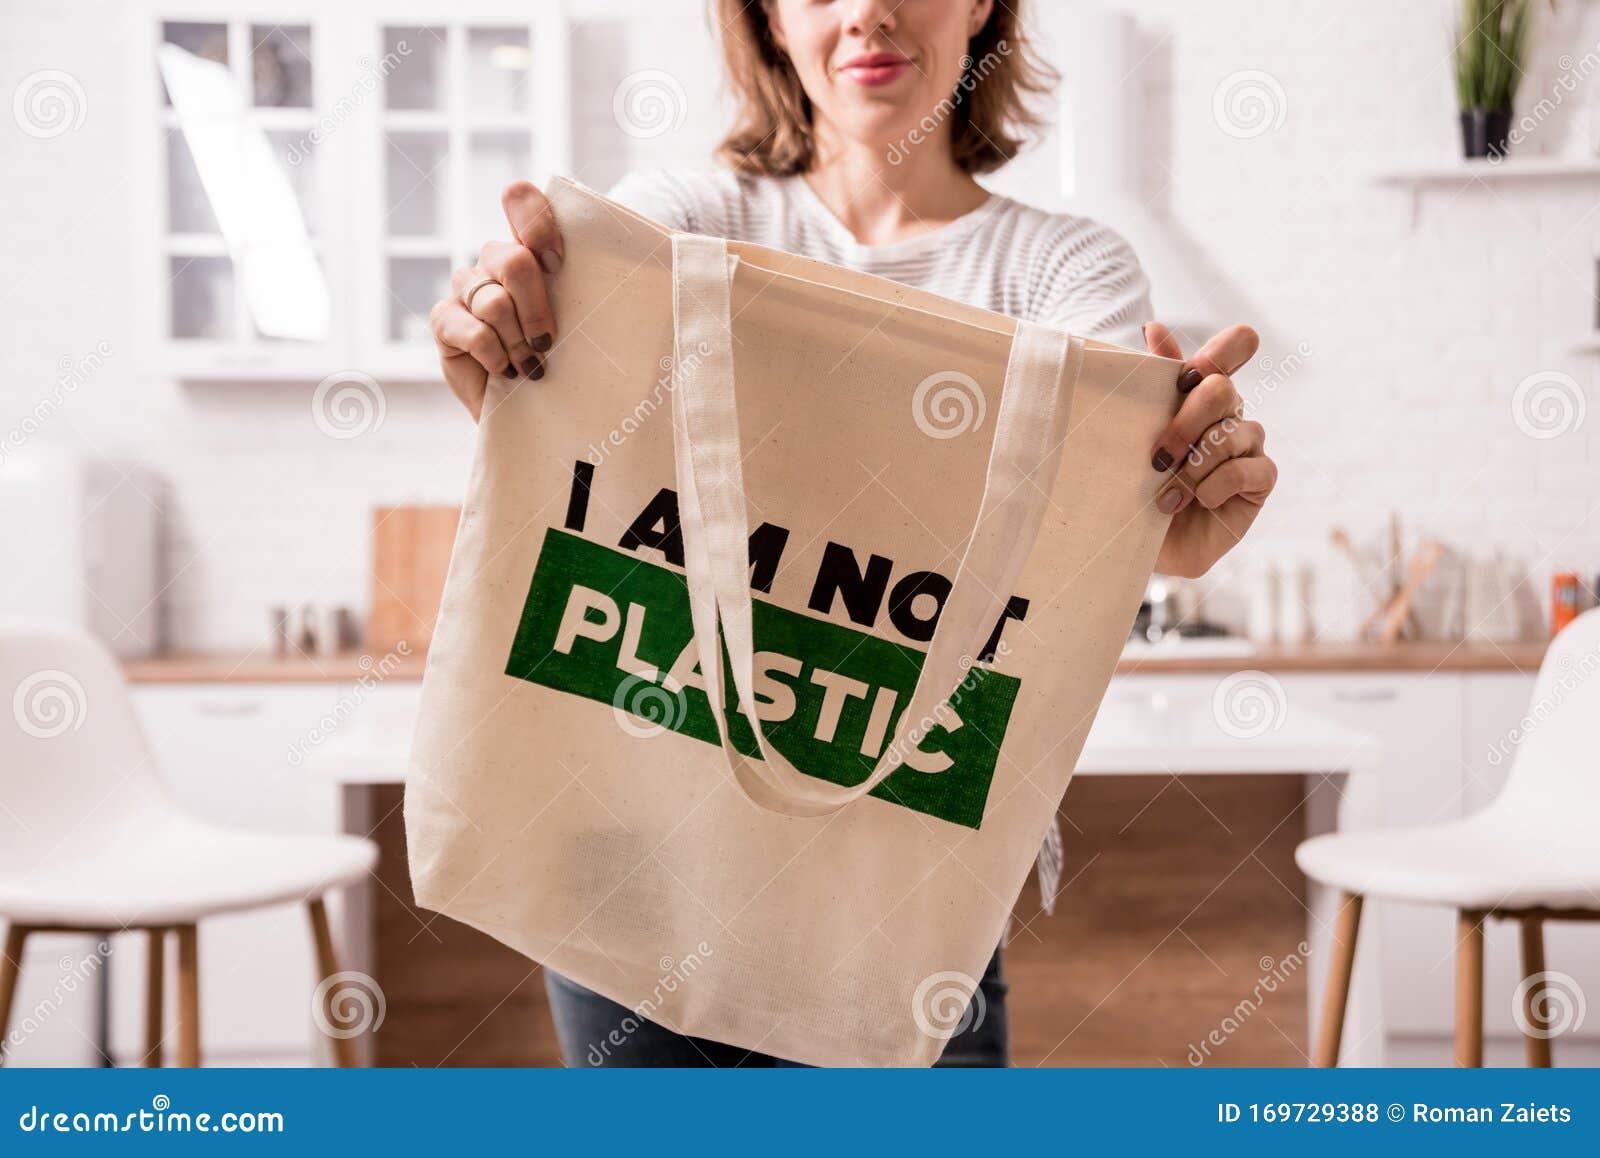 Image Details IST_18013_01419 - Say no to plastic, use cloth bags, World  environment day, cute cartoon style concept. Green Ecology Earth Vector  illustration.